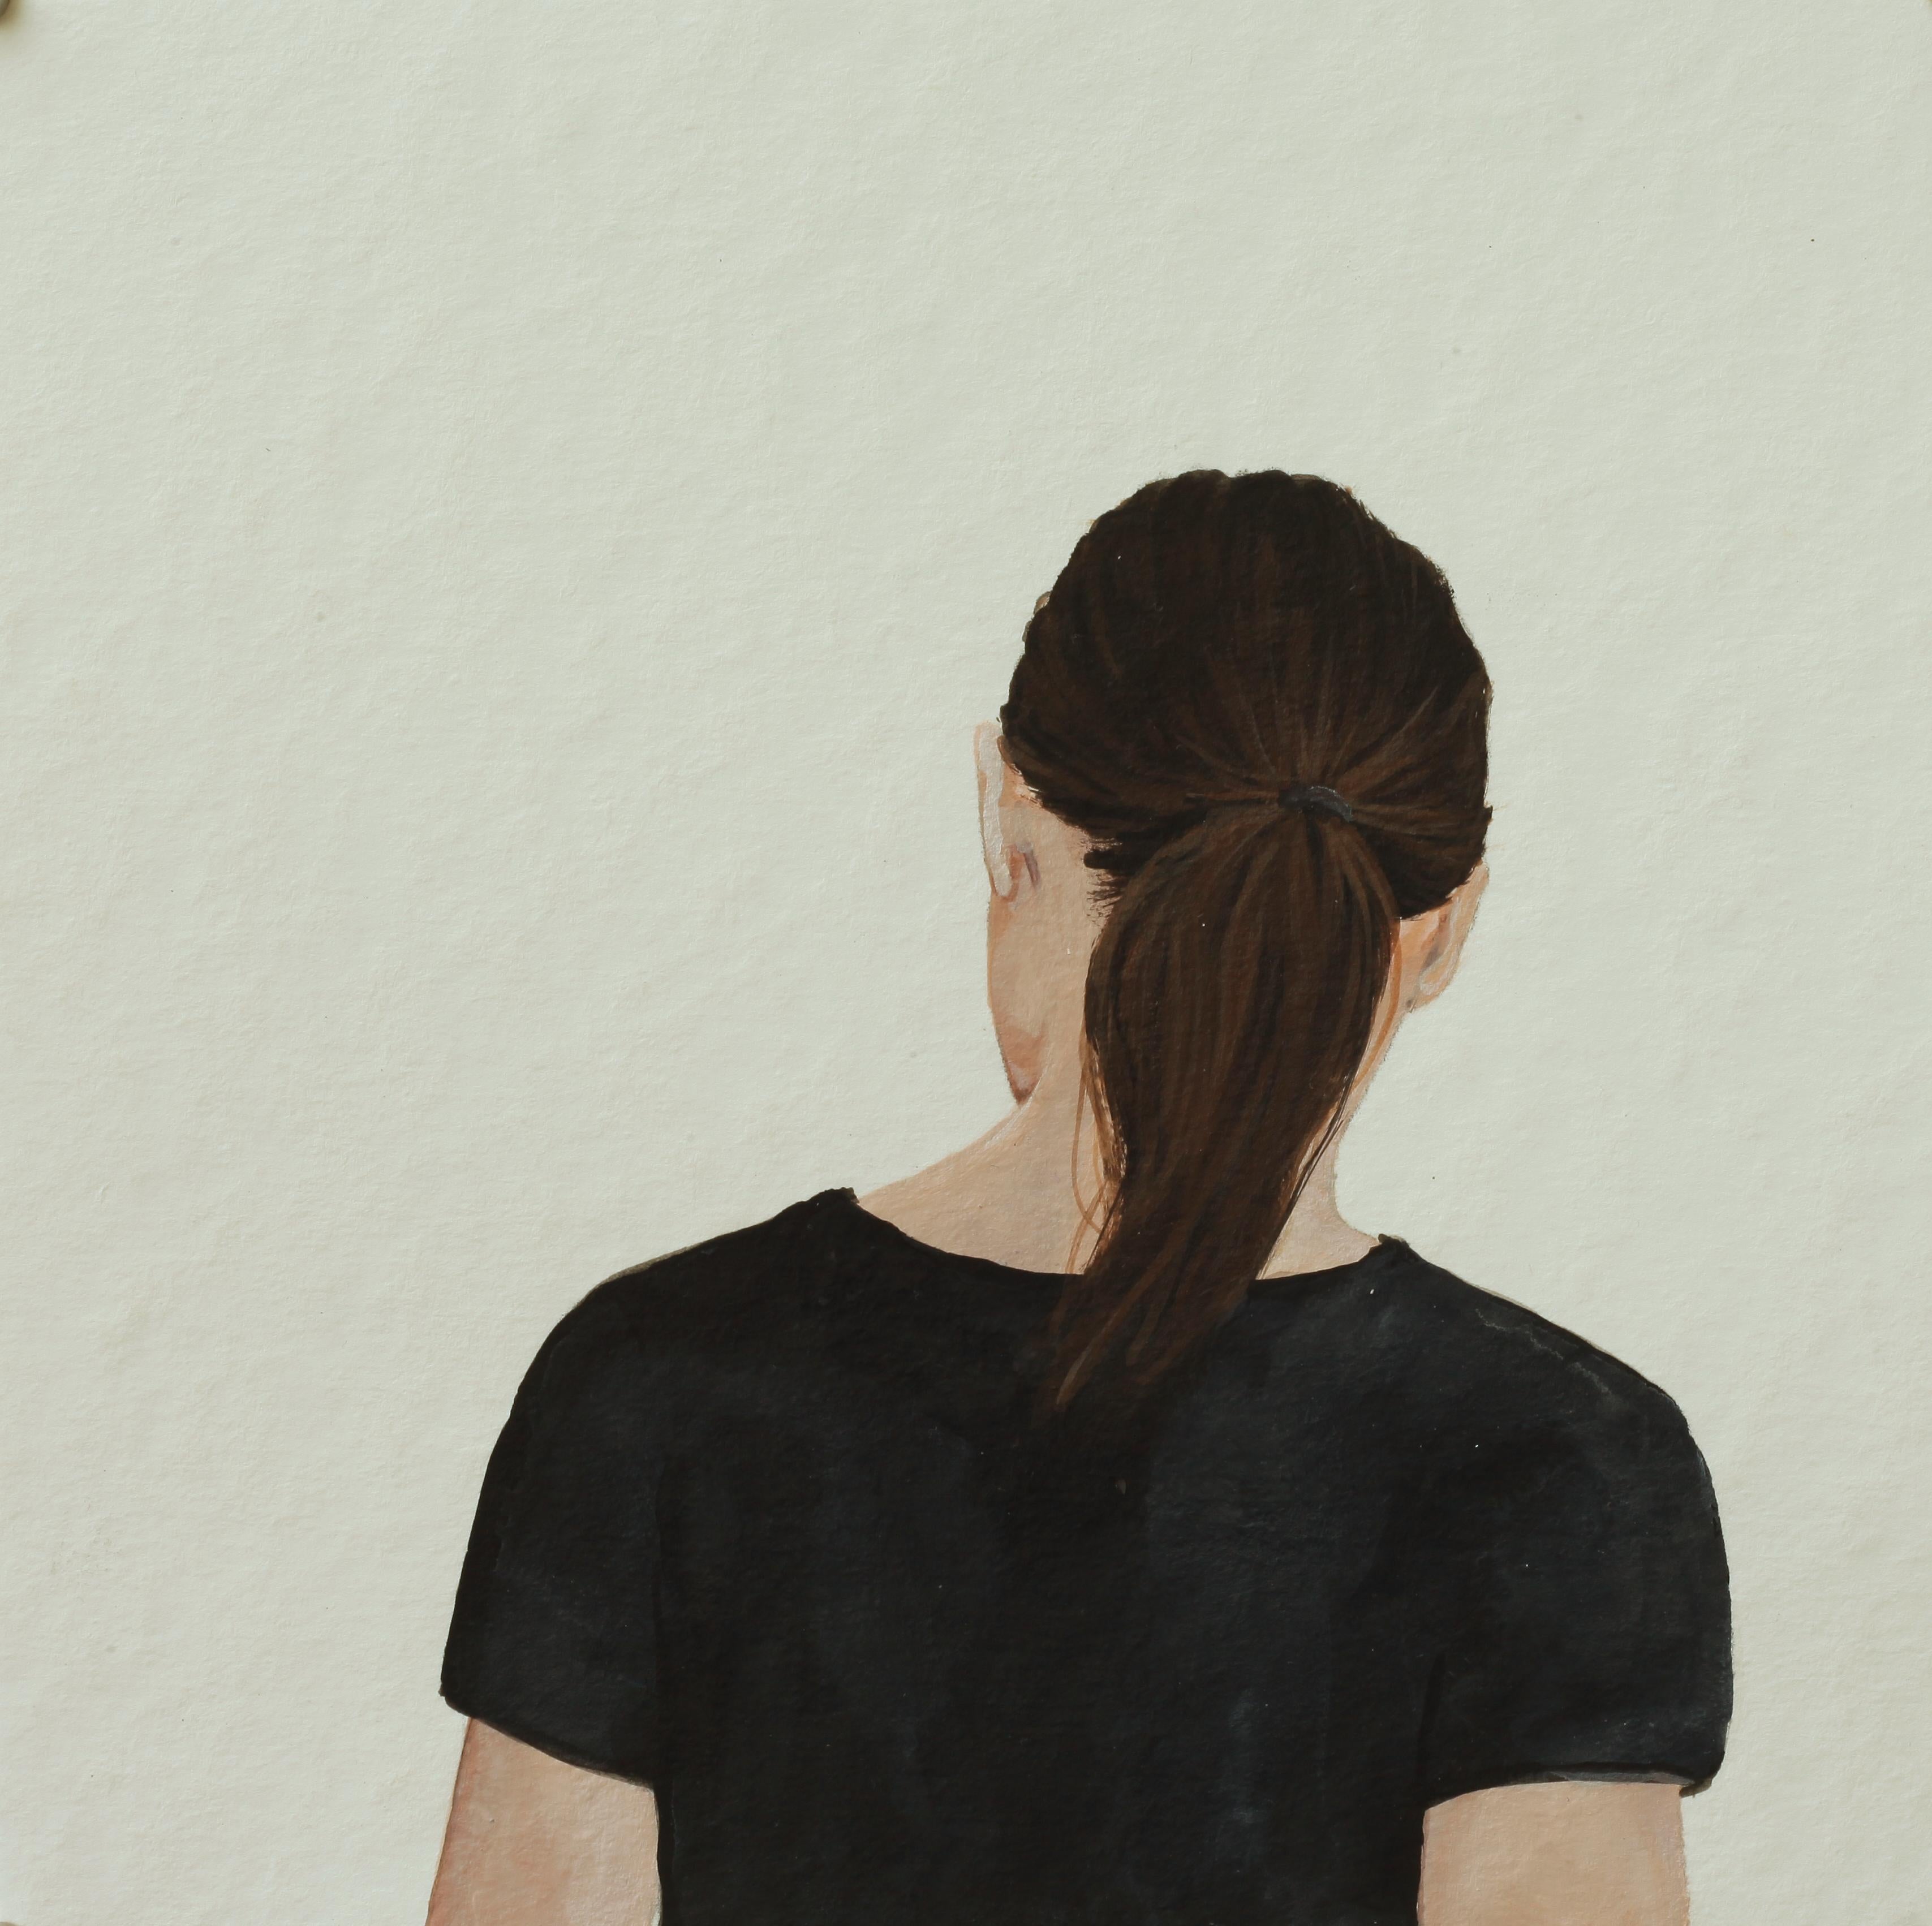 Karoline Kroiss Figurative Painting - "Back Portrait III" Contemporary Portrait Painting of a Girl with Ponytail 